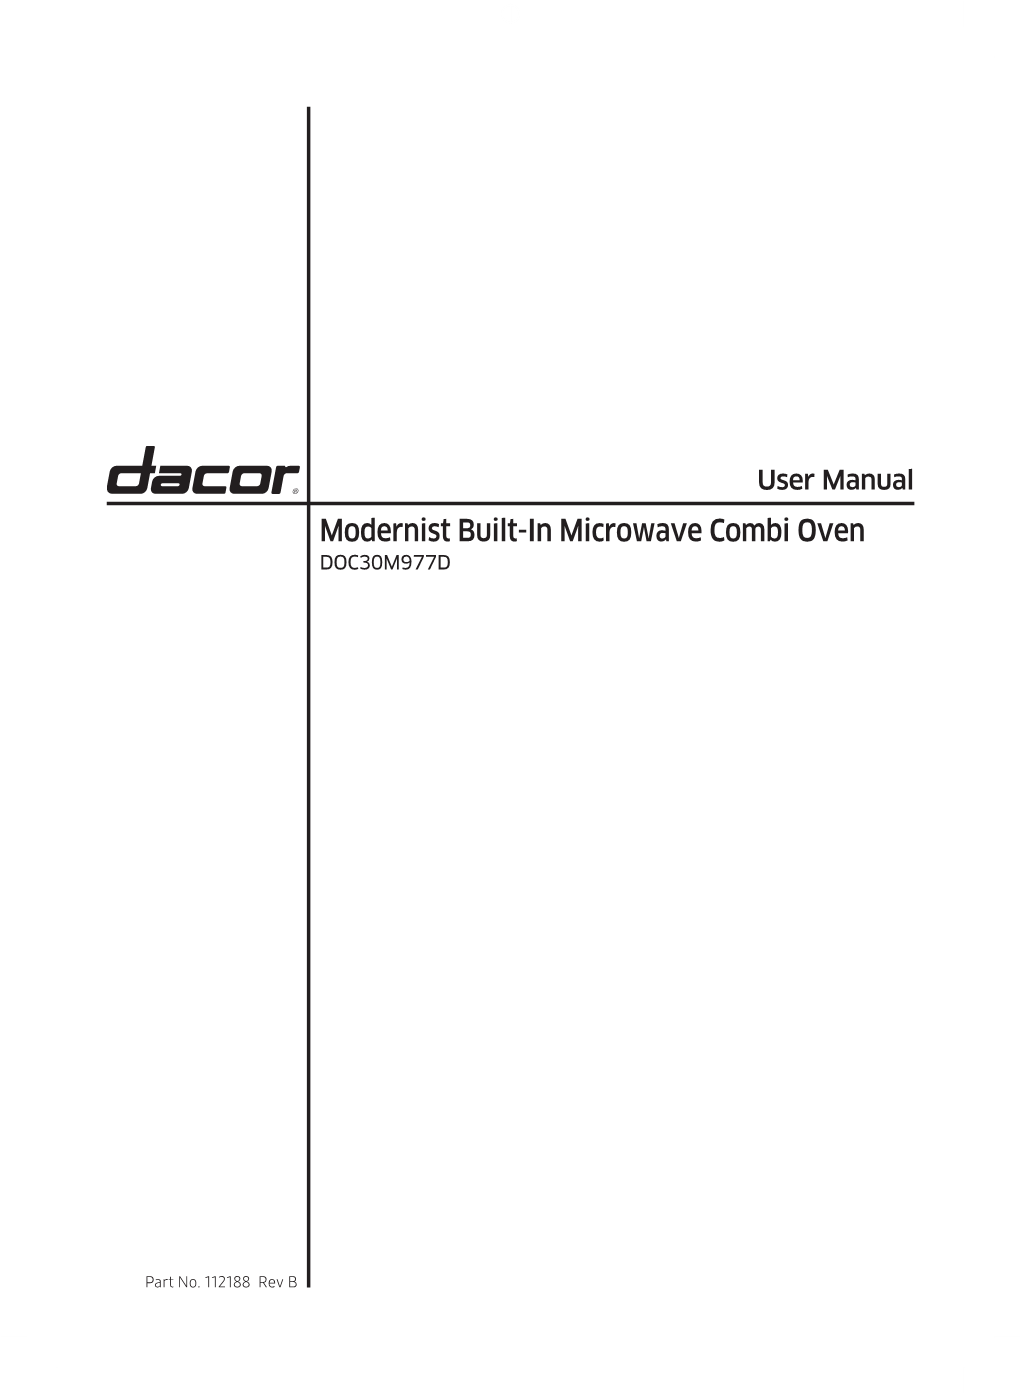 User Manual Modernist Built-In Microwave Combi Oven DOC30M977D